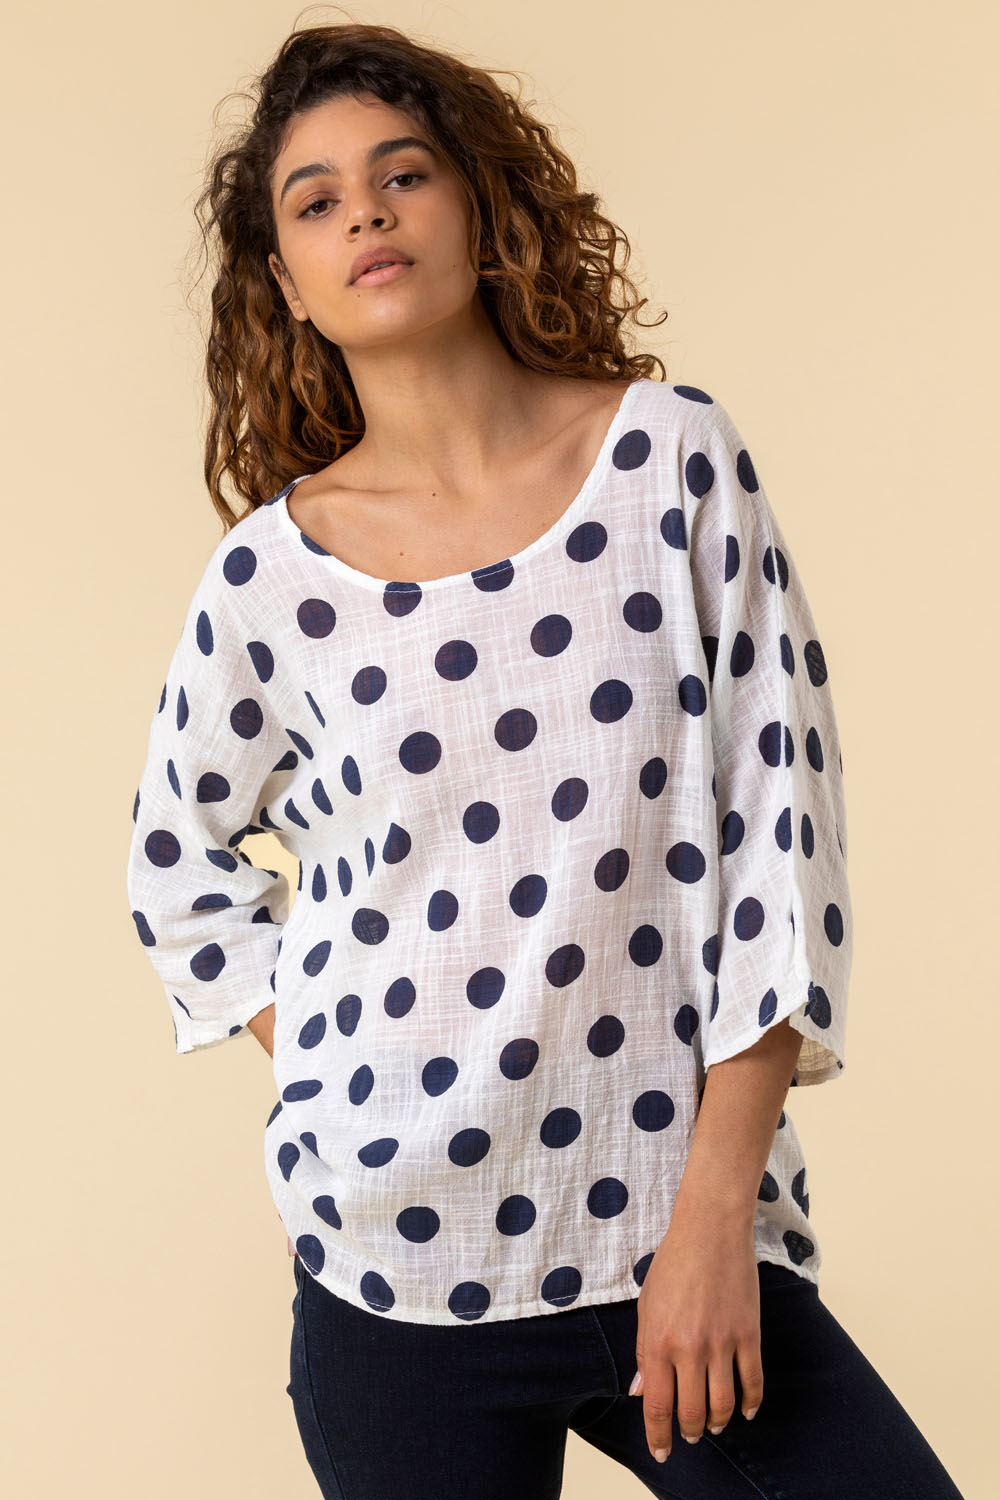 Ivory  Spot Print 3/4 Sleeve Top, Image 3 of 4